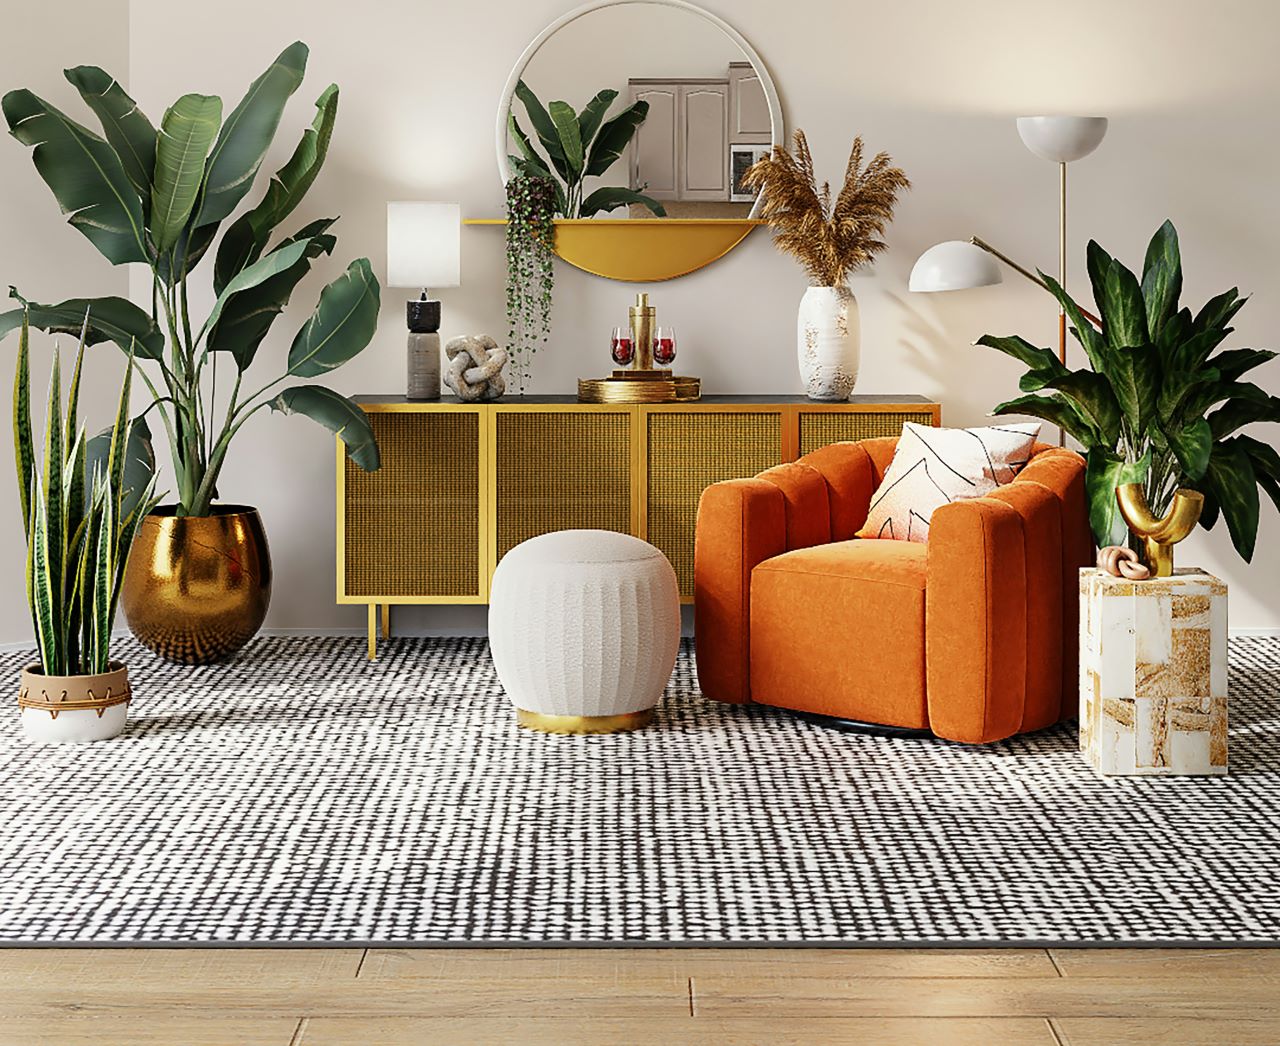 Select a rug material that matches your living room décor.